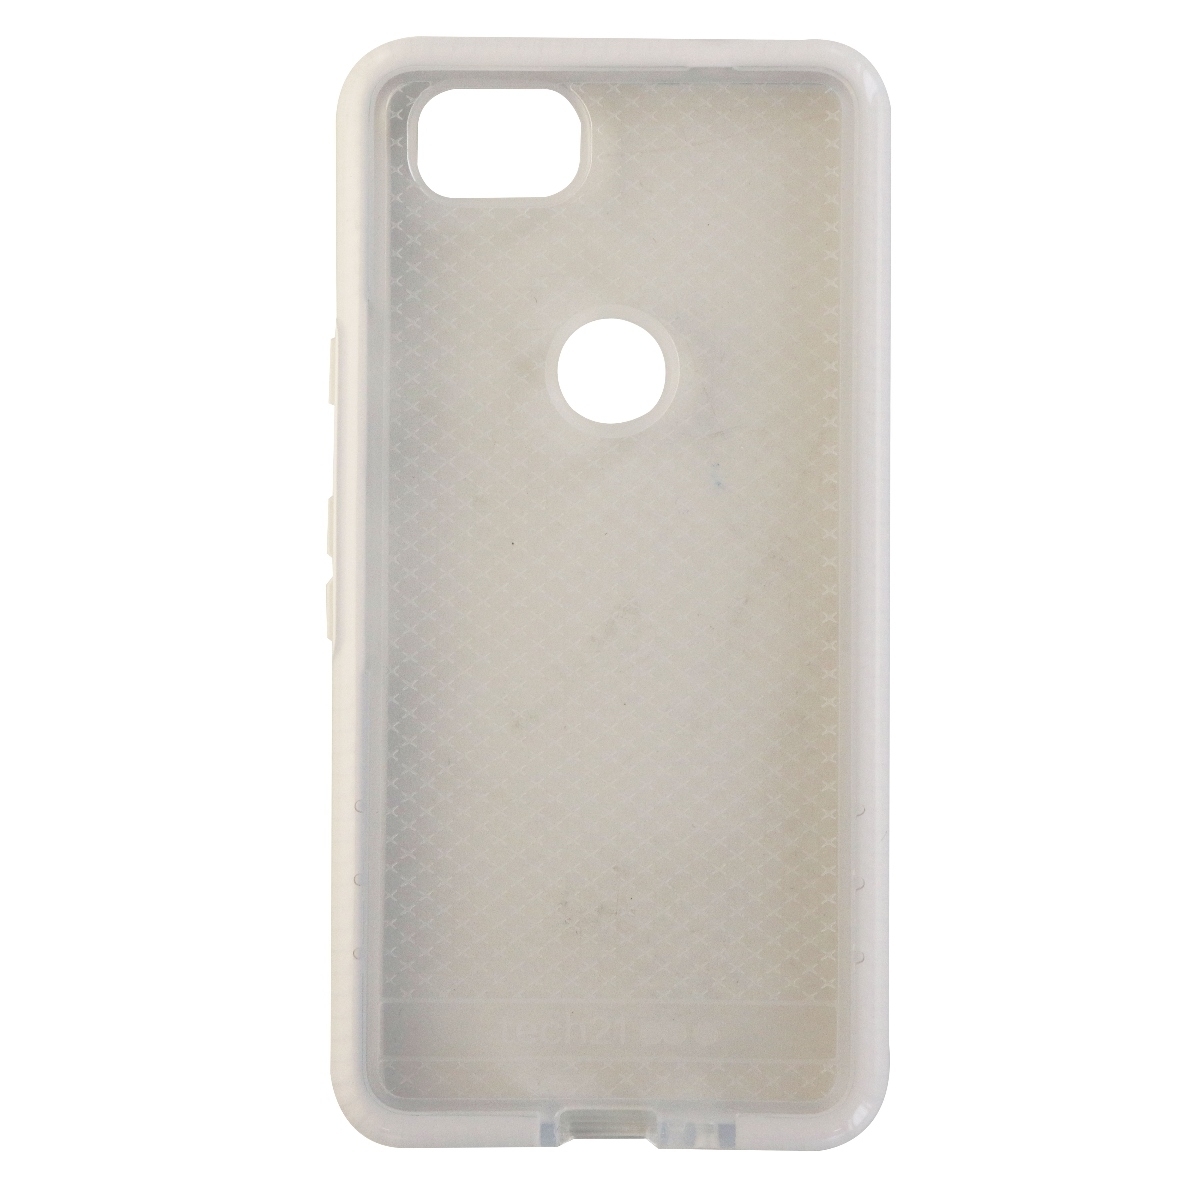 Tech21 Evo Check Series Protective Gel Case For Google Pixel 2 - Clear/White